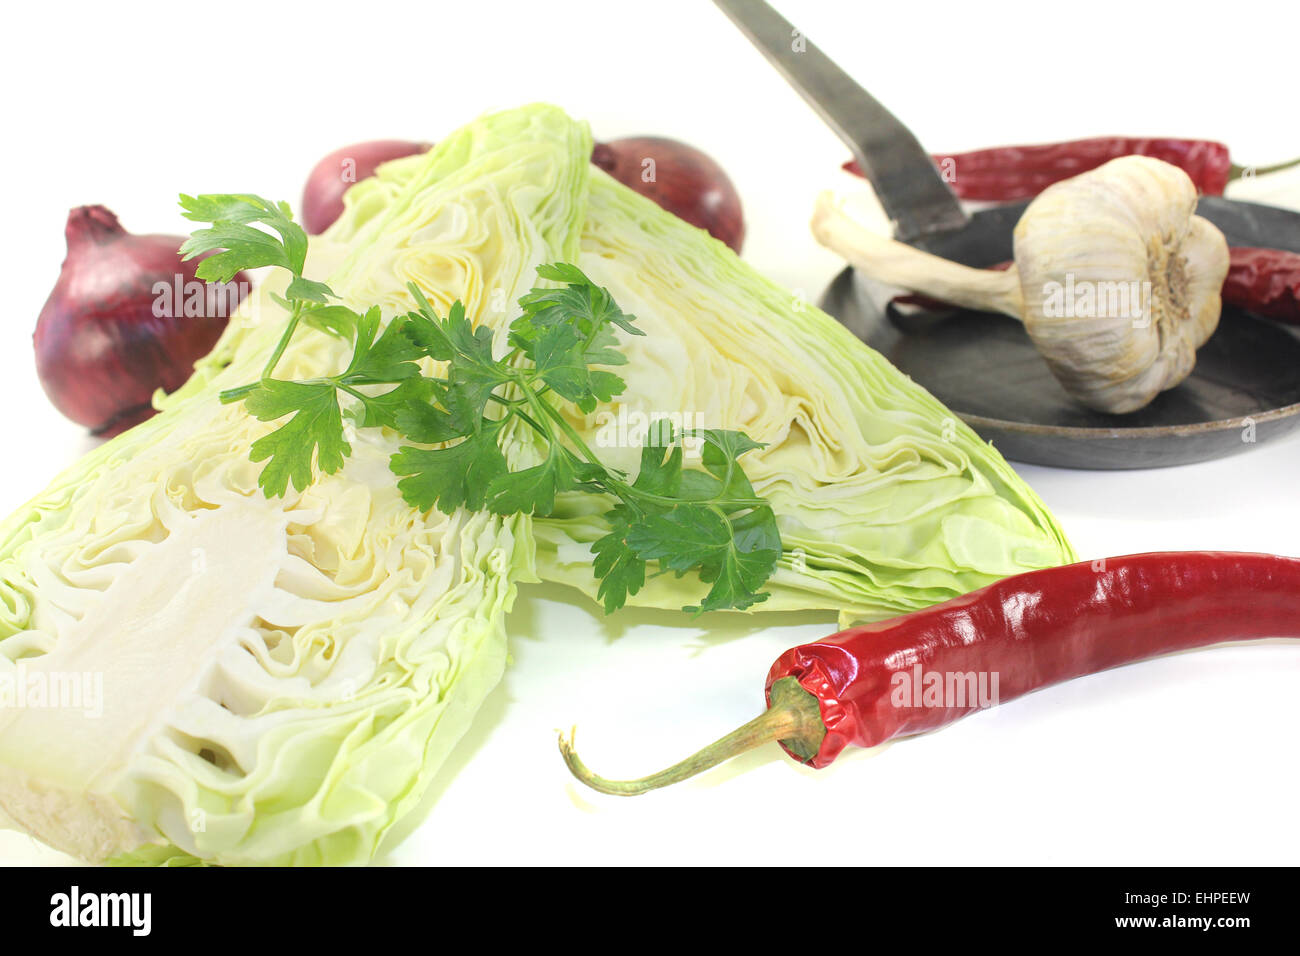 sweetheart cabbage with parsley Stock Photo